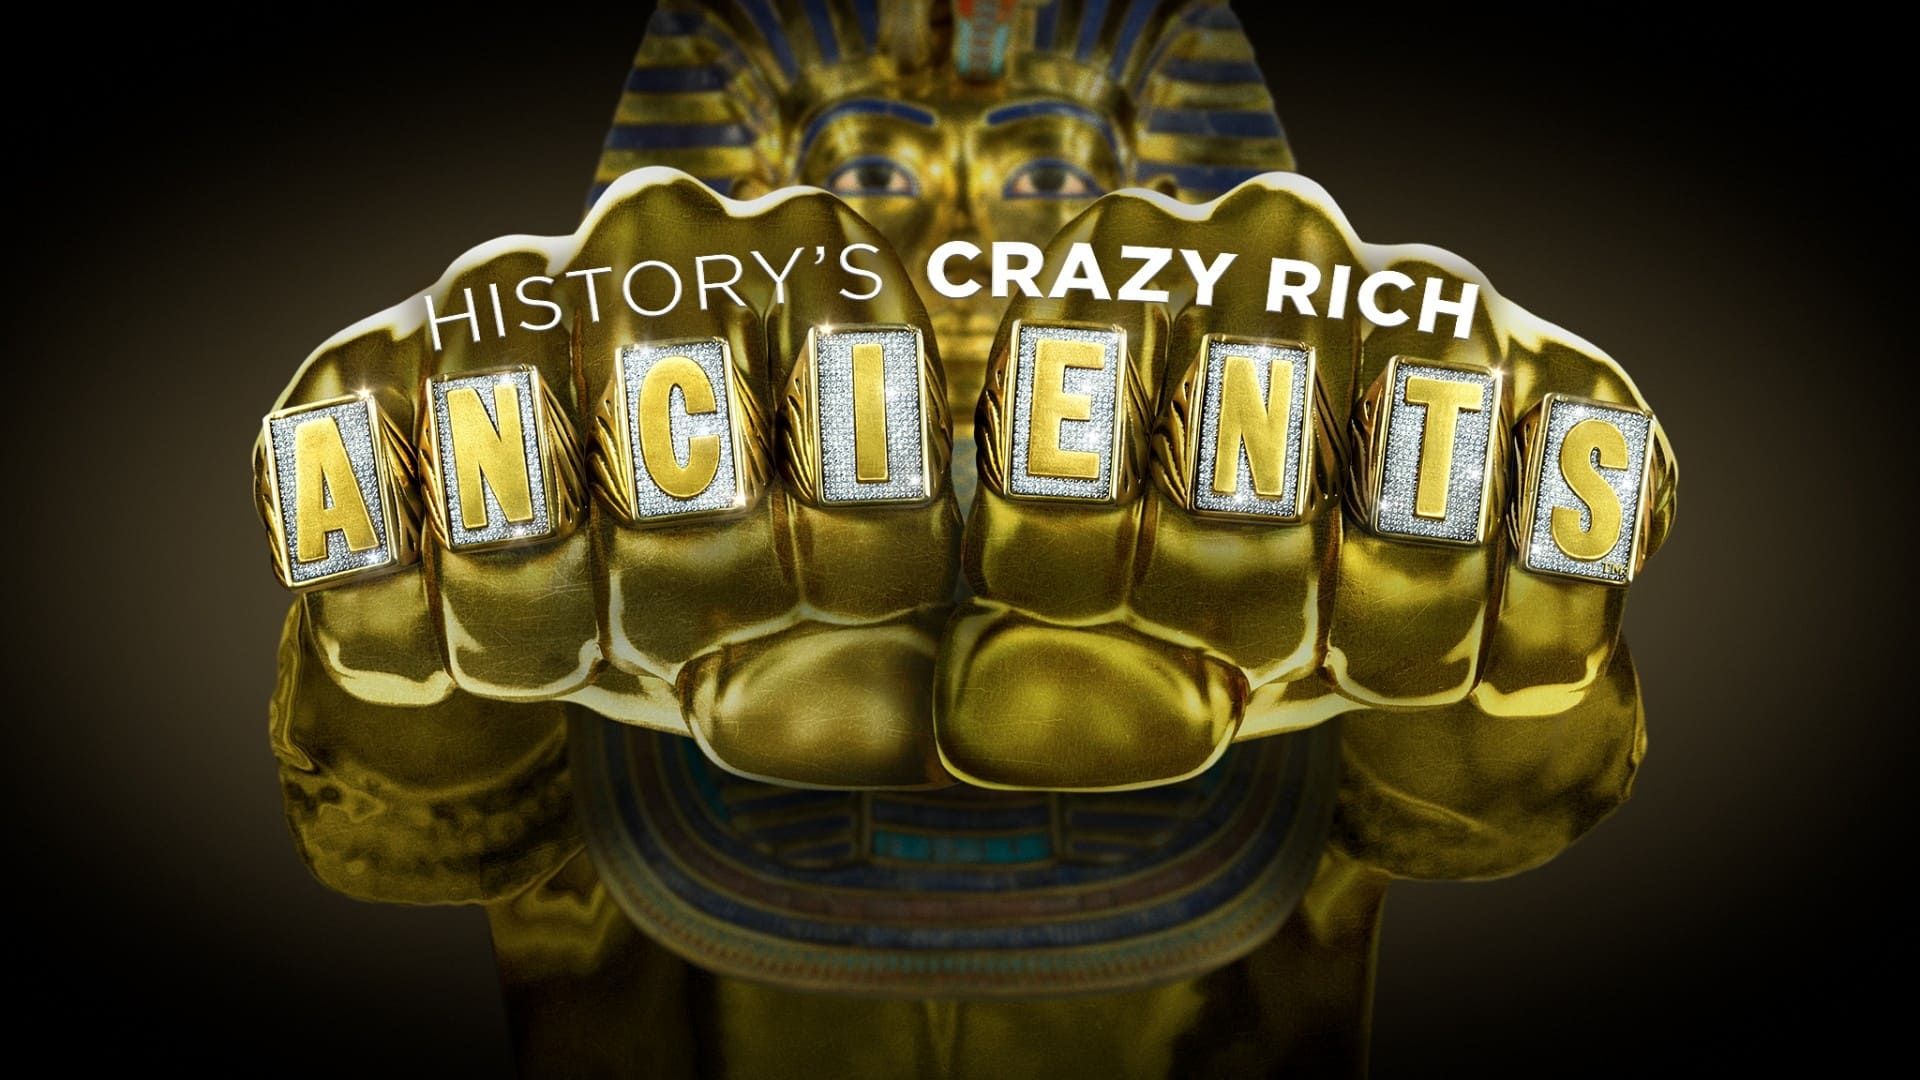 History's Crazy Rich Ancients background